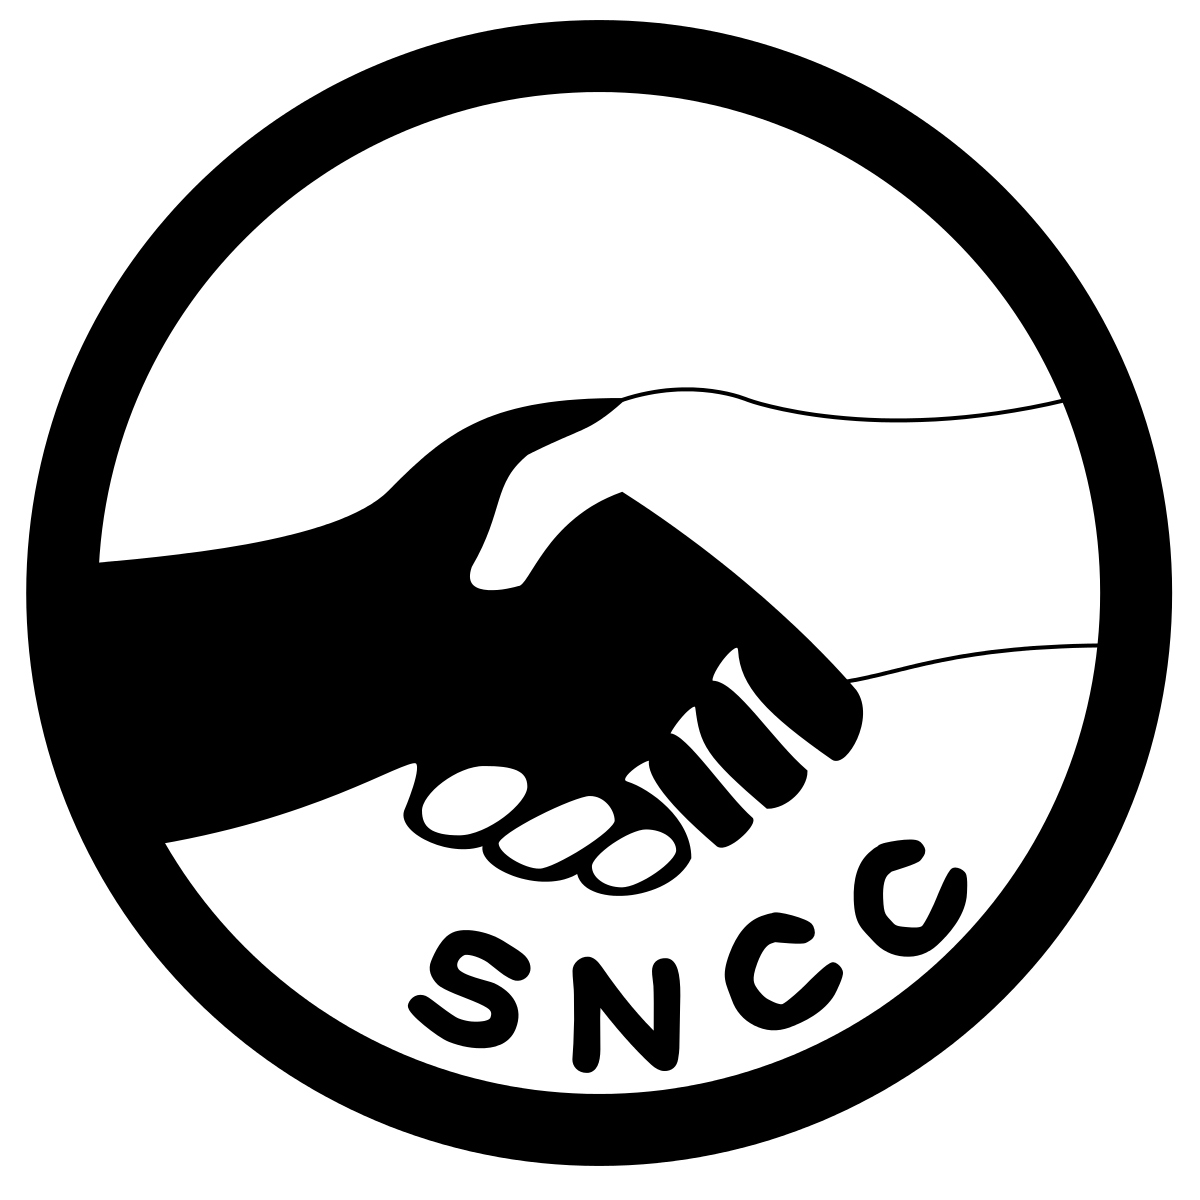 Leadership clipart black and white. Student nonviolent coordinating committee